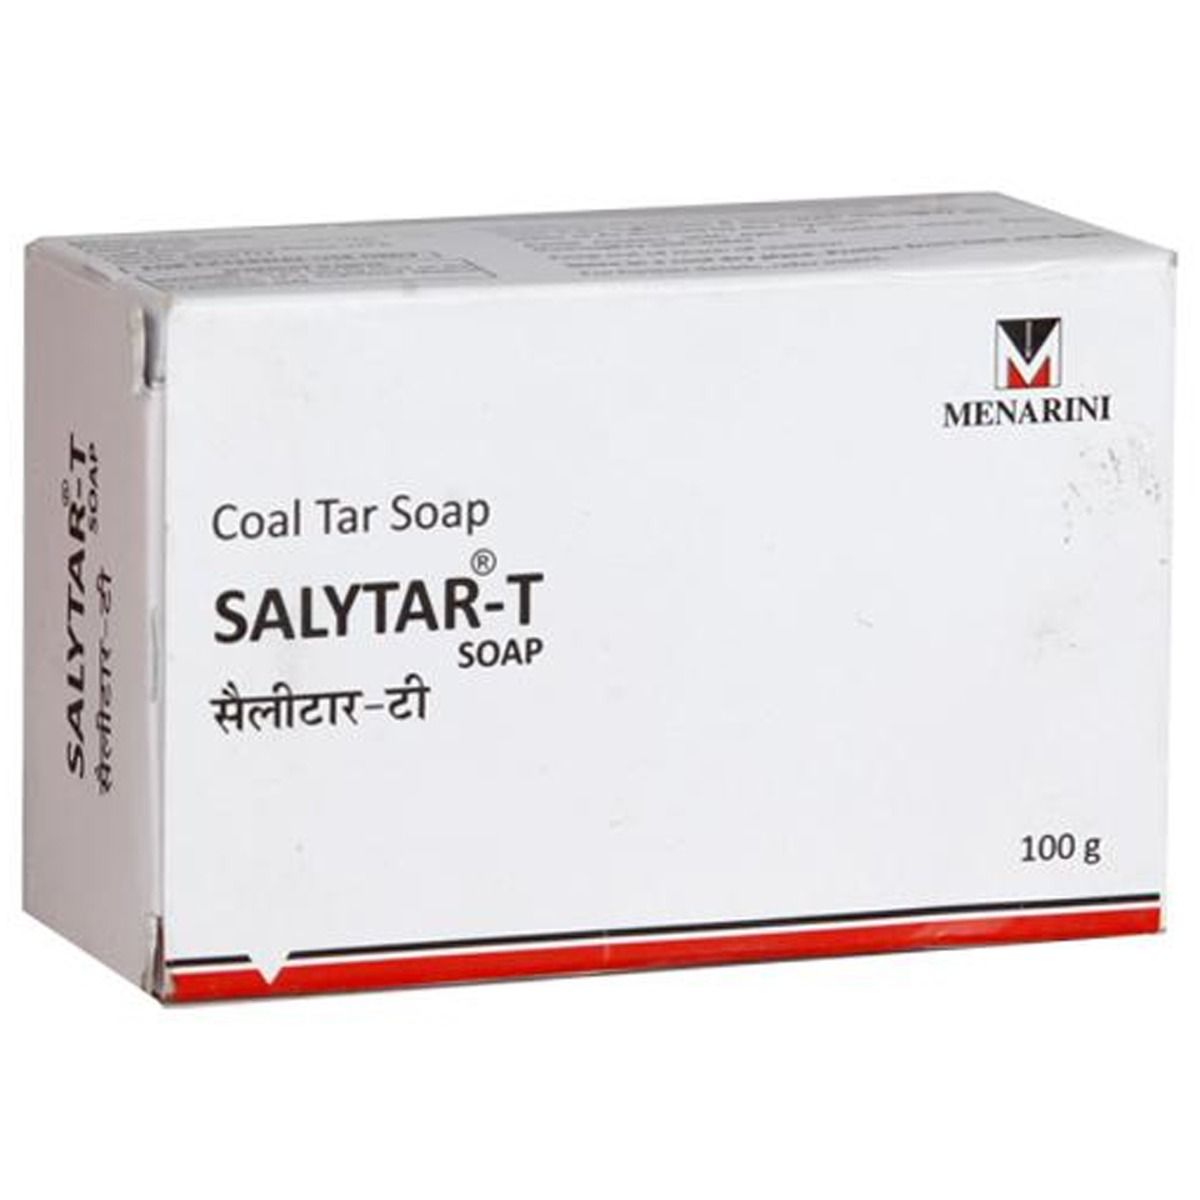 Salytar-T Soap, 100 gm, Pack of 1 